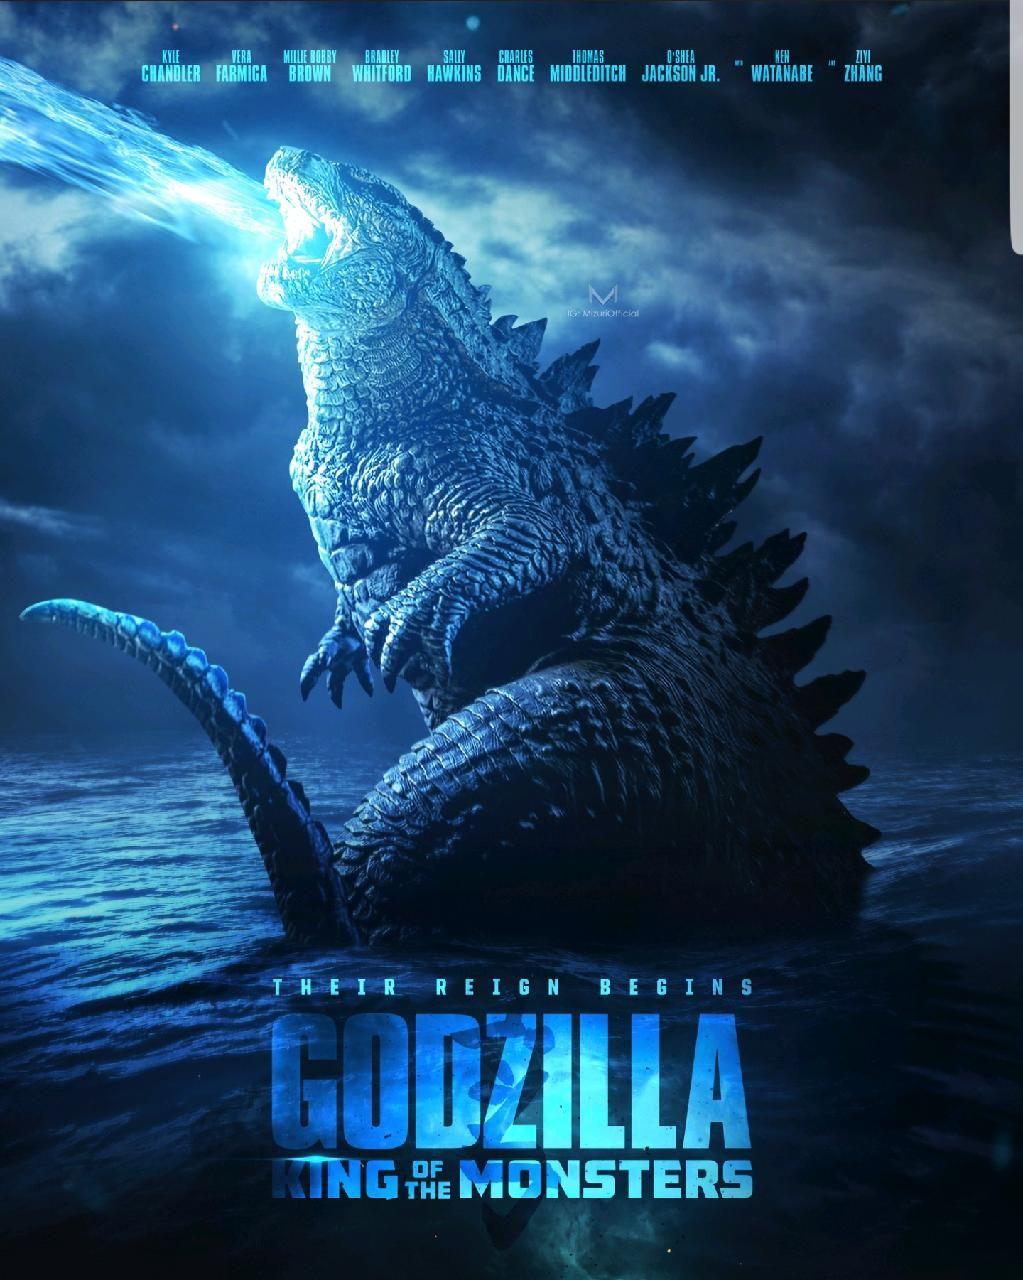 Godzilla King Of The Monsters Wallpapers Wallpaper Cave